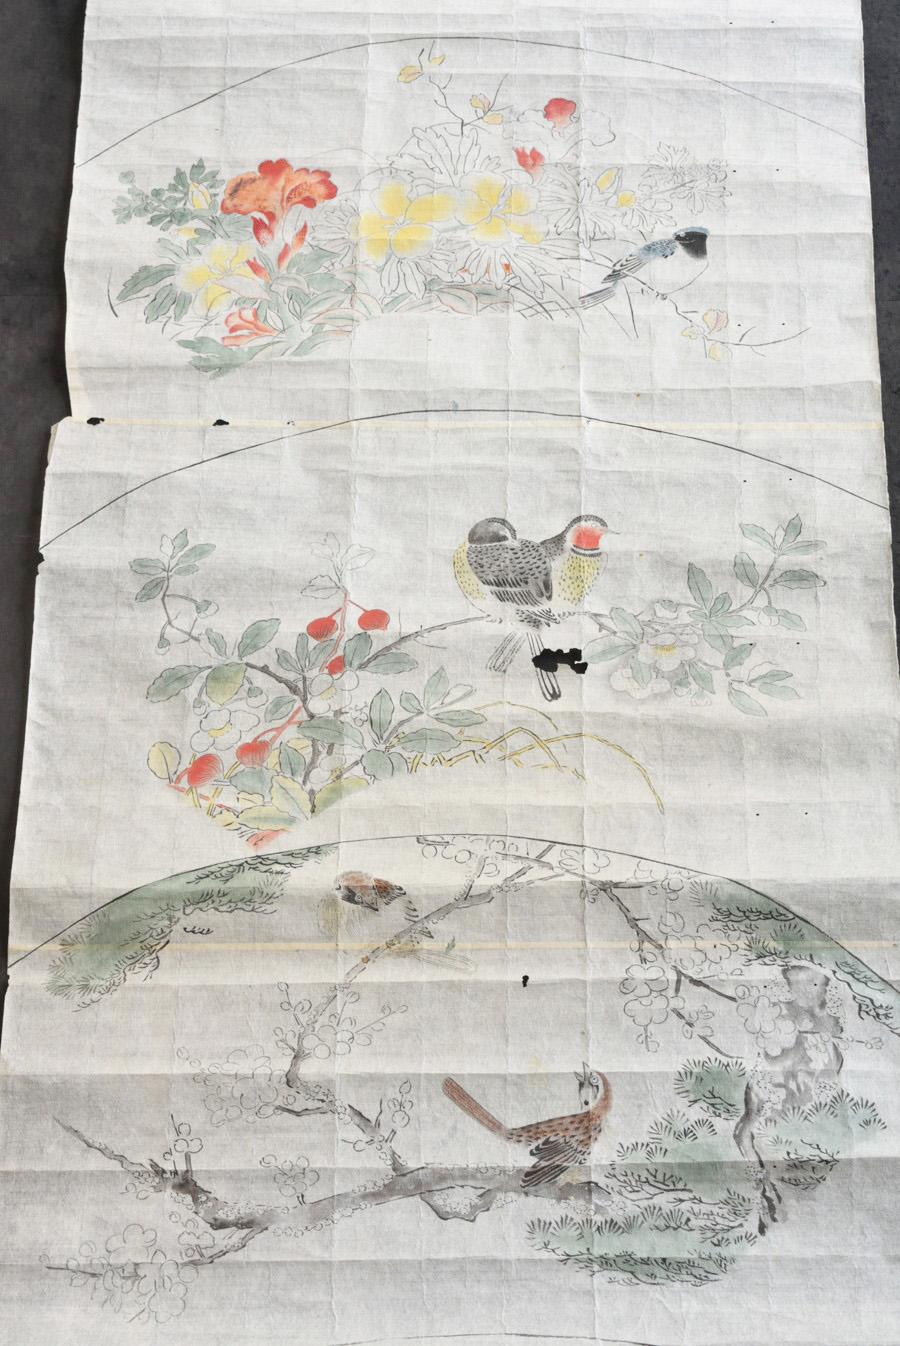 Paper Japanese antique sketch scroll / 1800-1900 / Flower, bird and animal paintings For Sale